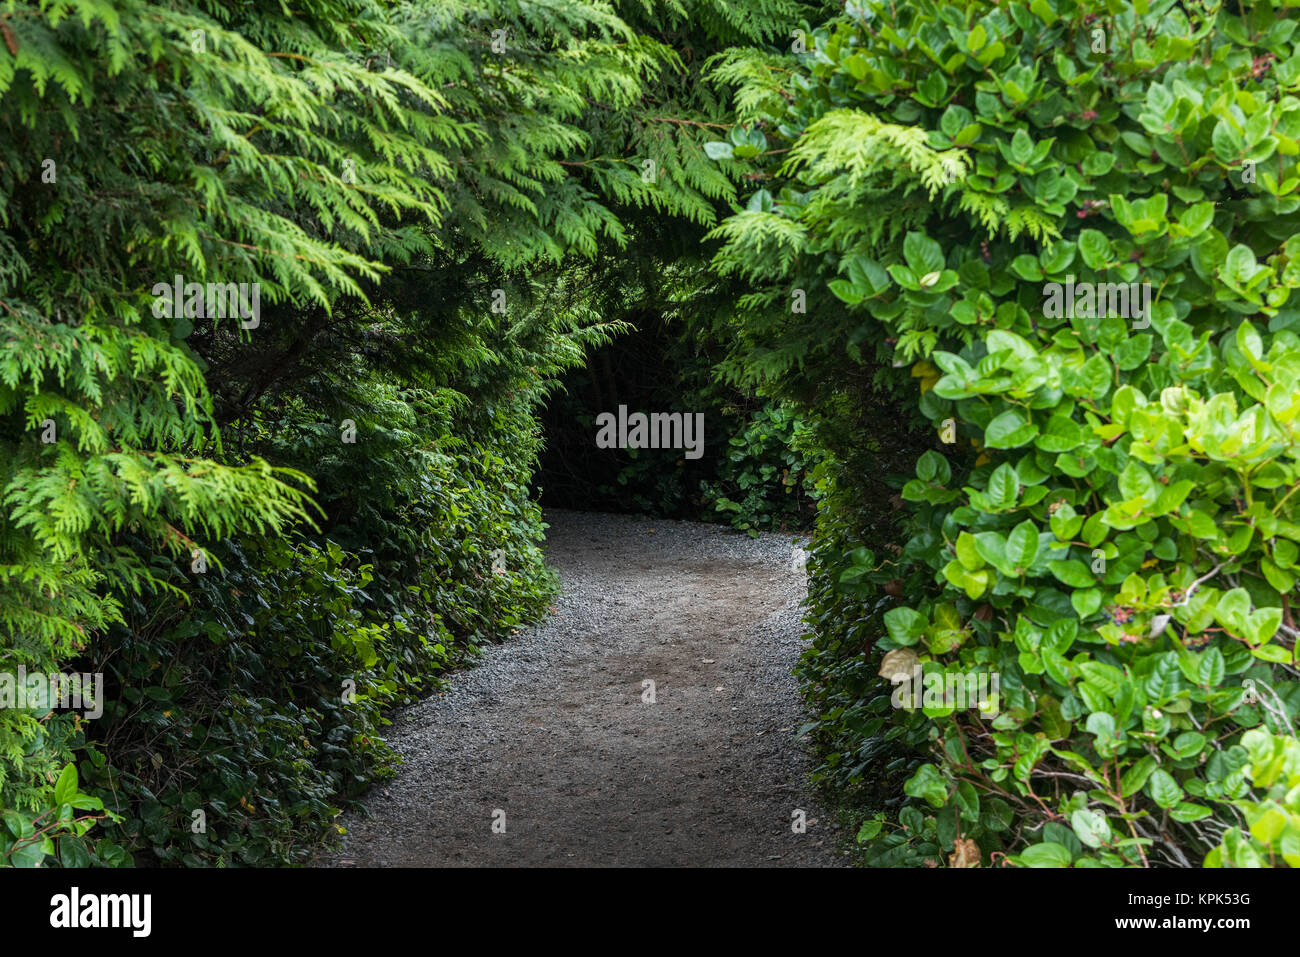 A trail leading through trees and shrubs with lush, green foliage; Ucluelet, British Columbia, Canada Stock Photo